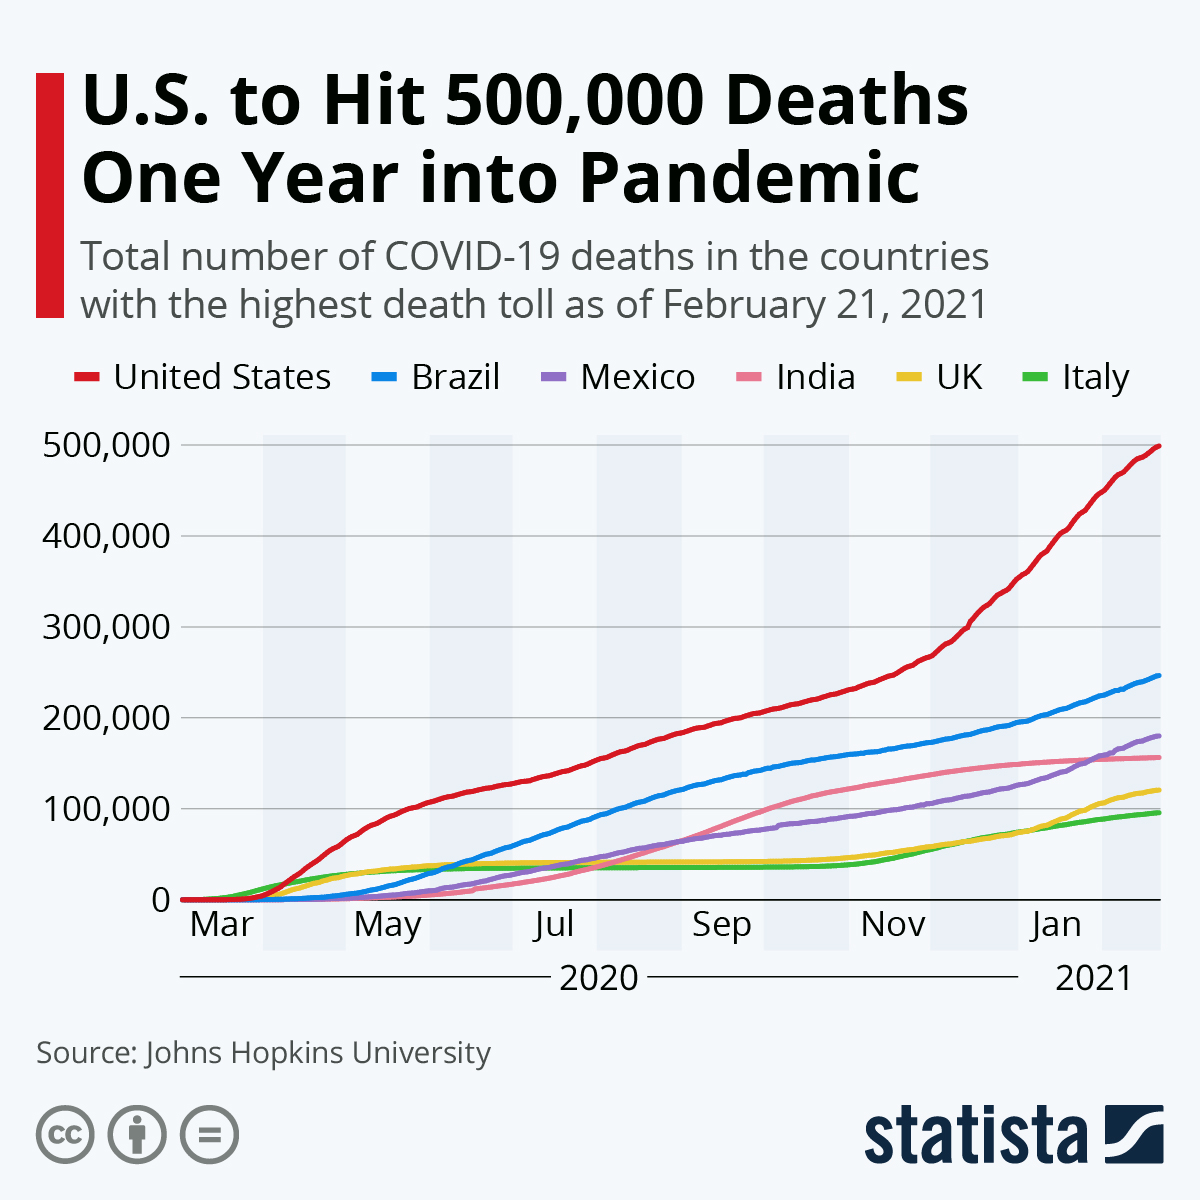 U.S. to Hit 500,000 Deaths One Year Into Pandemic